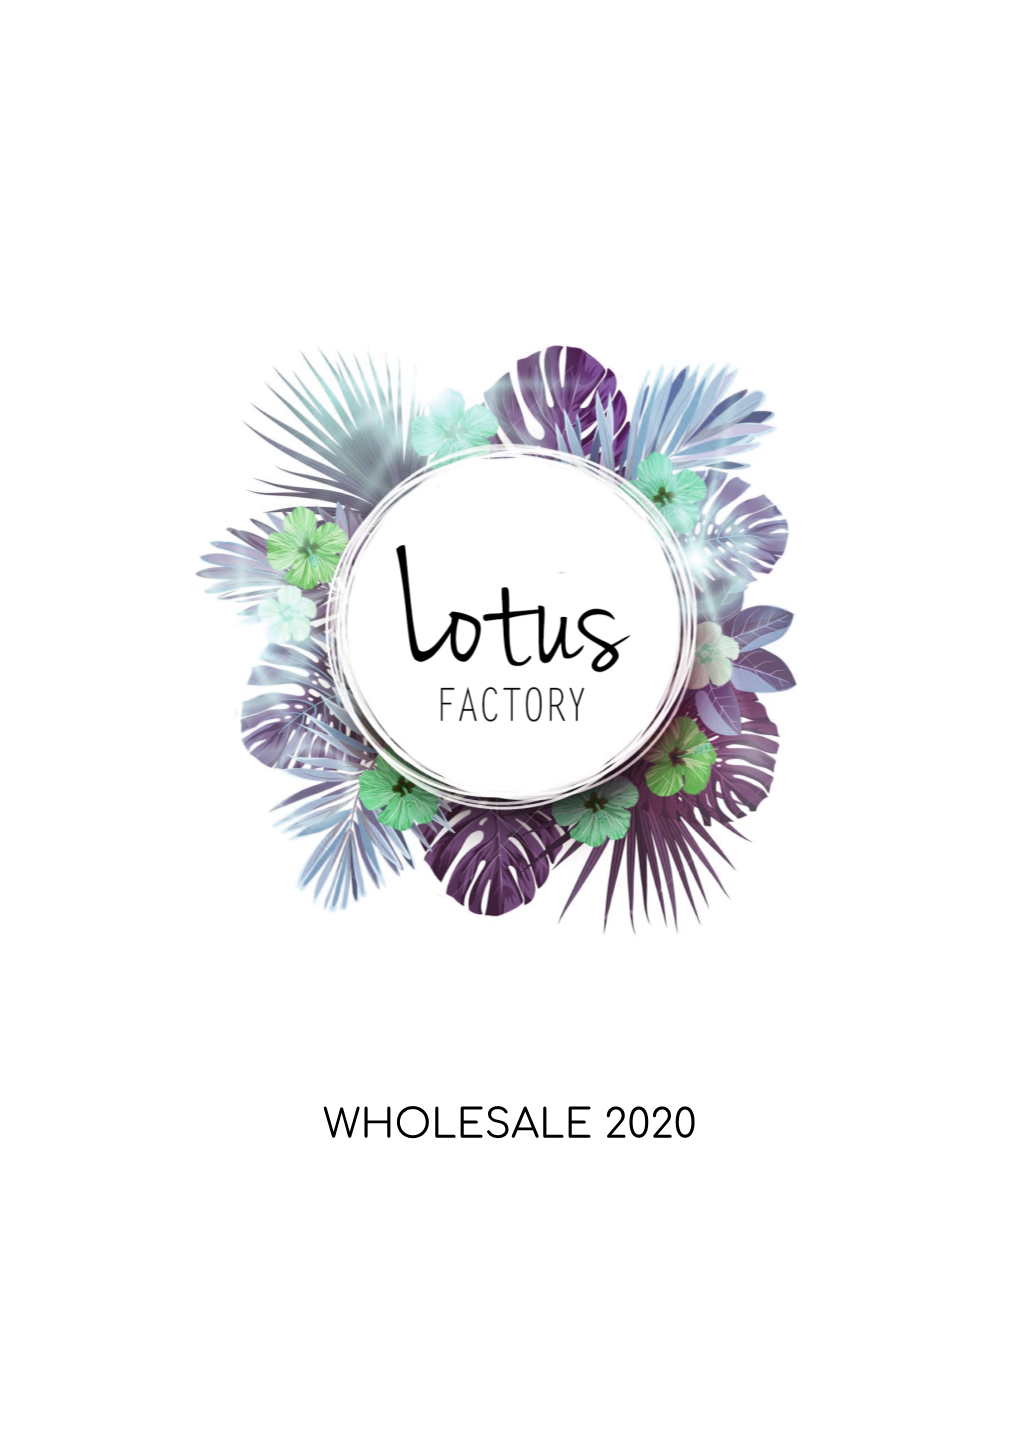 Wholesale 2020 Overview